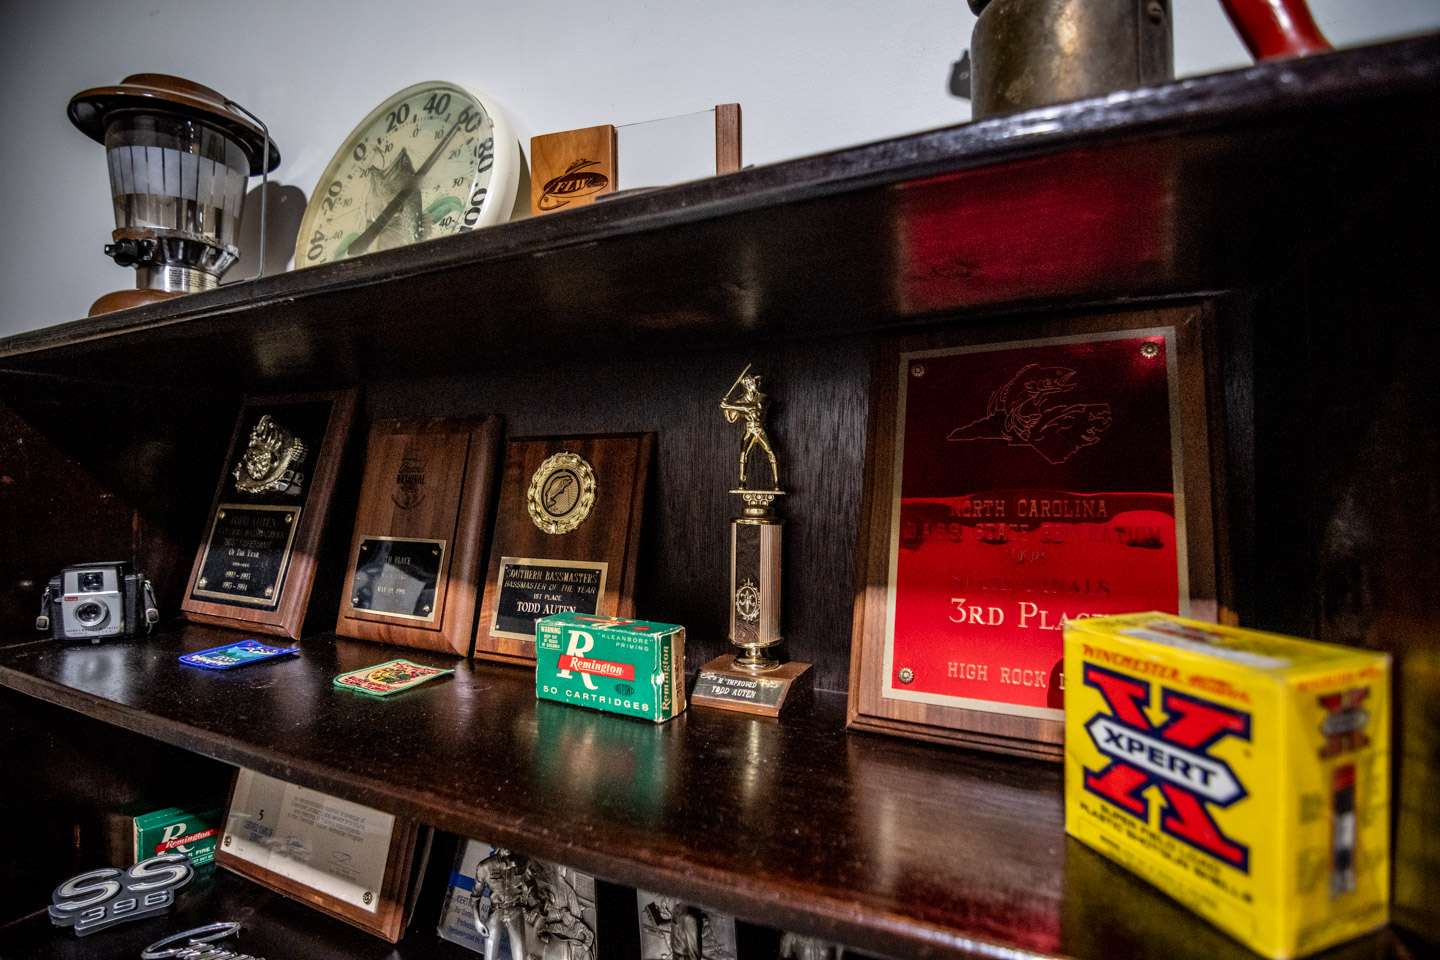 Everything from old boxes of ammo, a camera, clocks and trophies. Auten truly has a variety of antique memorabilia. 